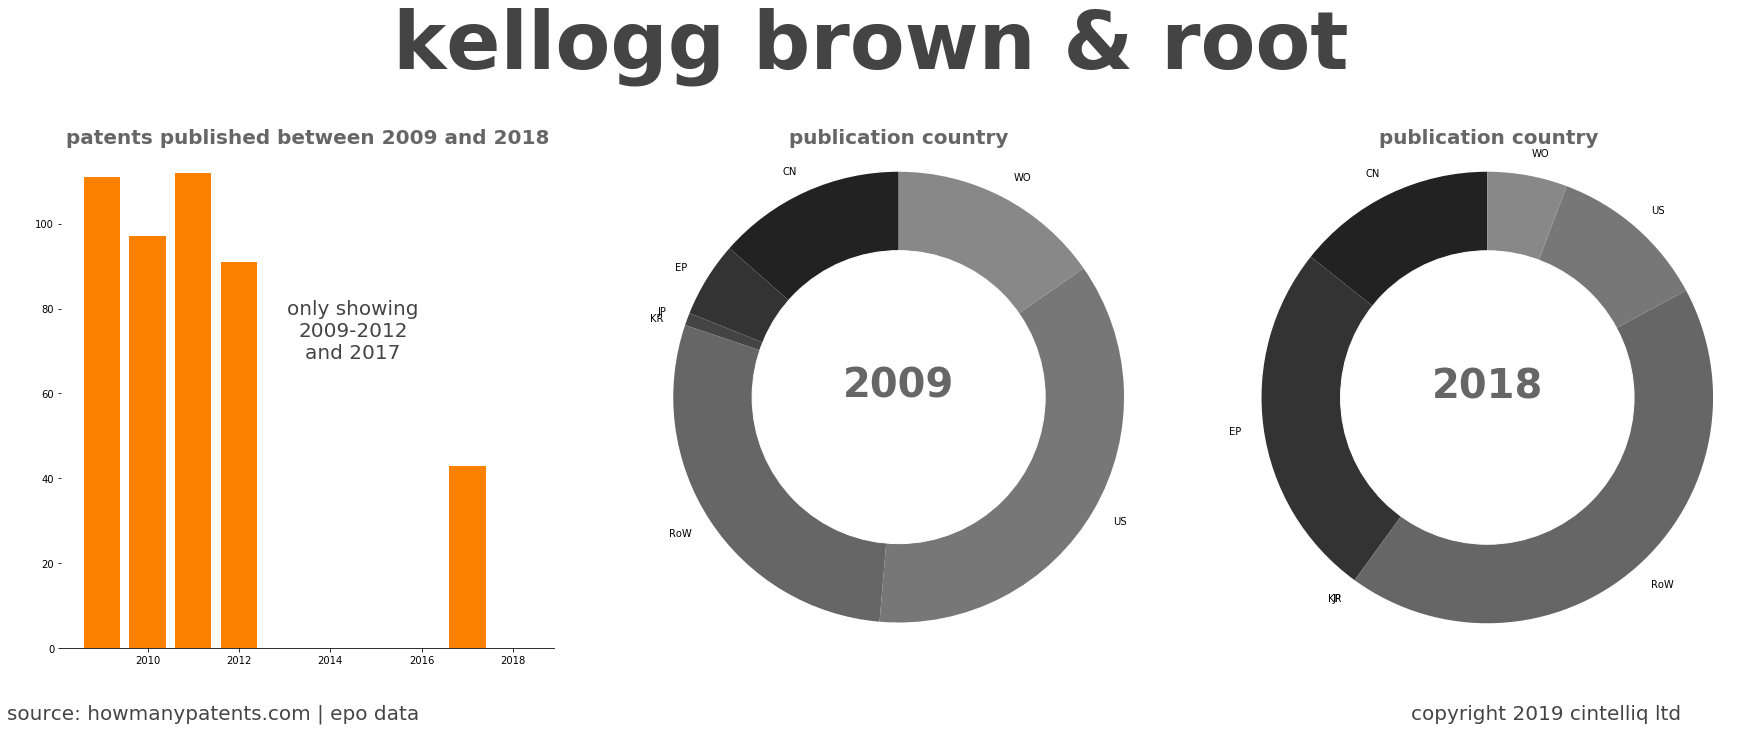 summary of patents for Kellogg Brown & Root